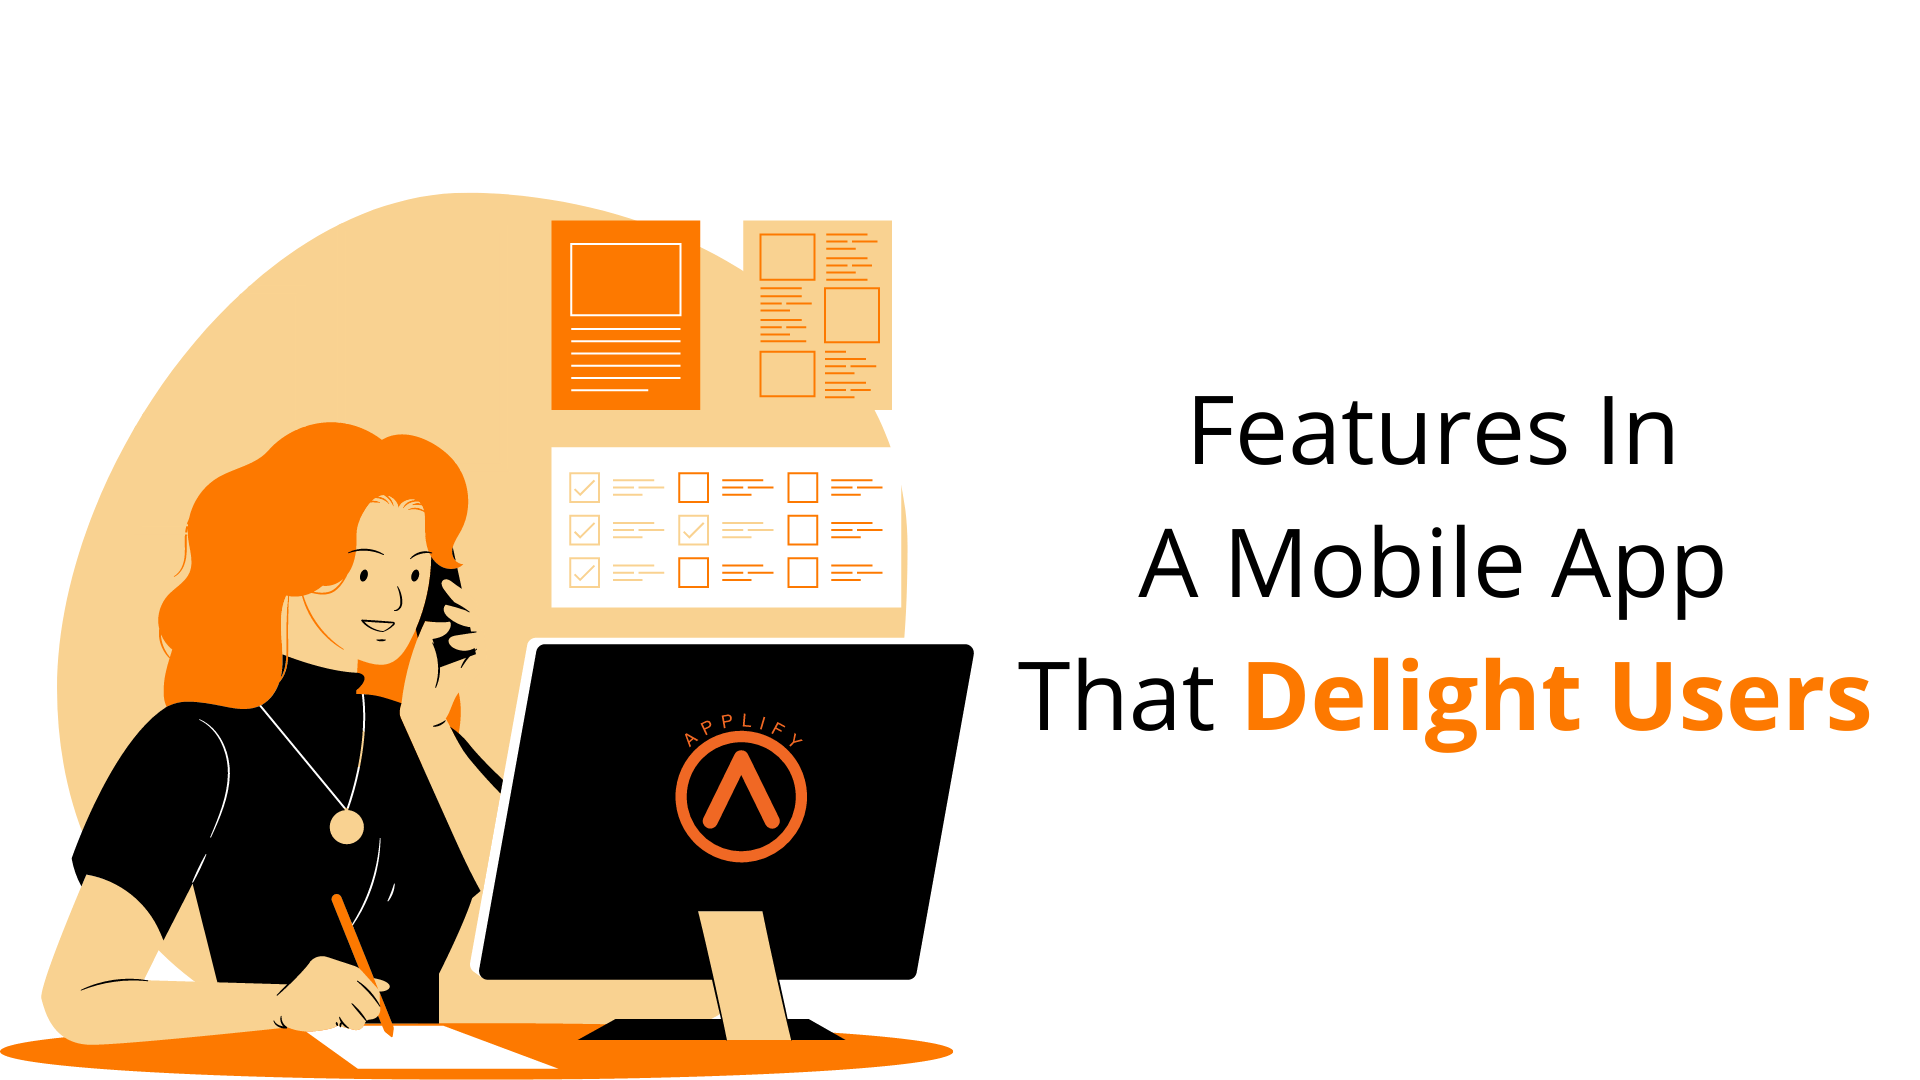 Features in a mobile app that delights users